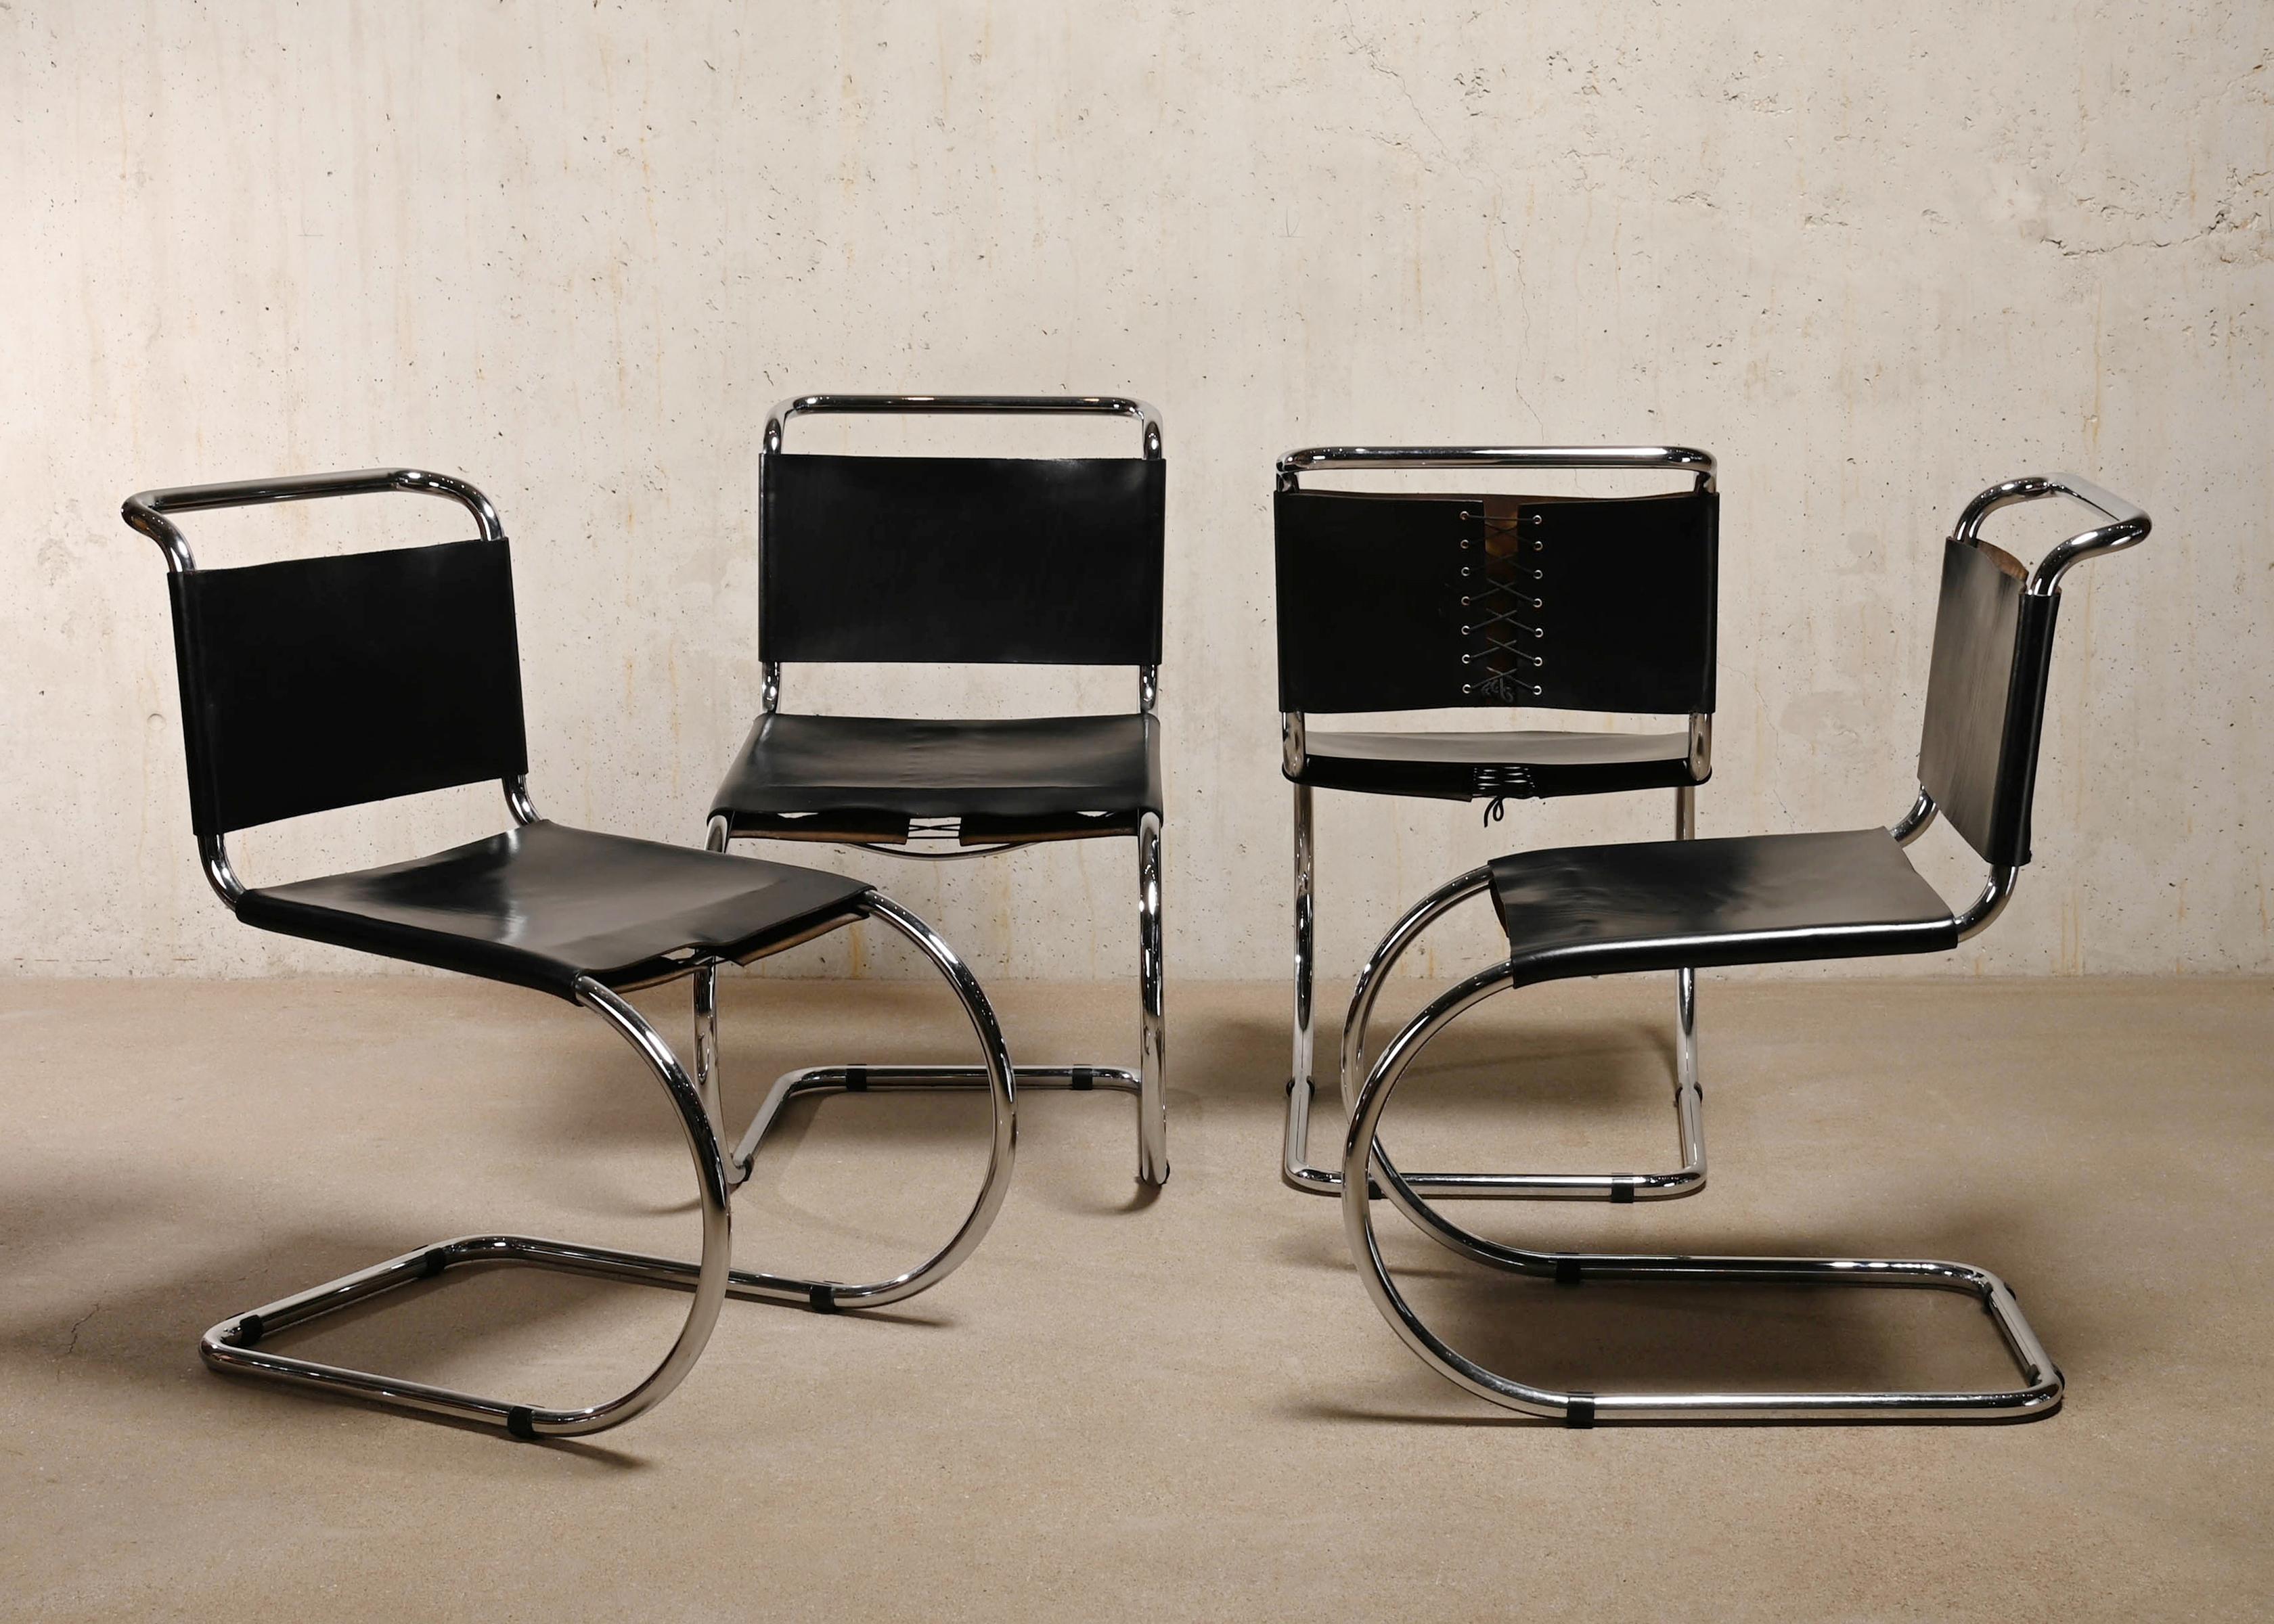 Iconic set of MR 10 (256CS) Cantilever dining chairs designed by Mies van der Rohe for Gavina. Chrome plated steel tubular frames with black coloured seats and backrest in saddle leather. The leather is in very good condition, not dried out and